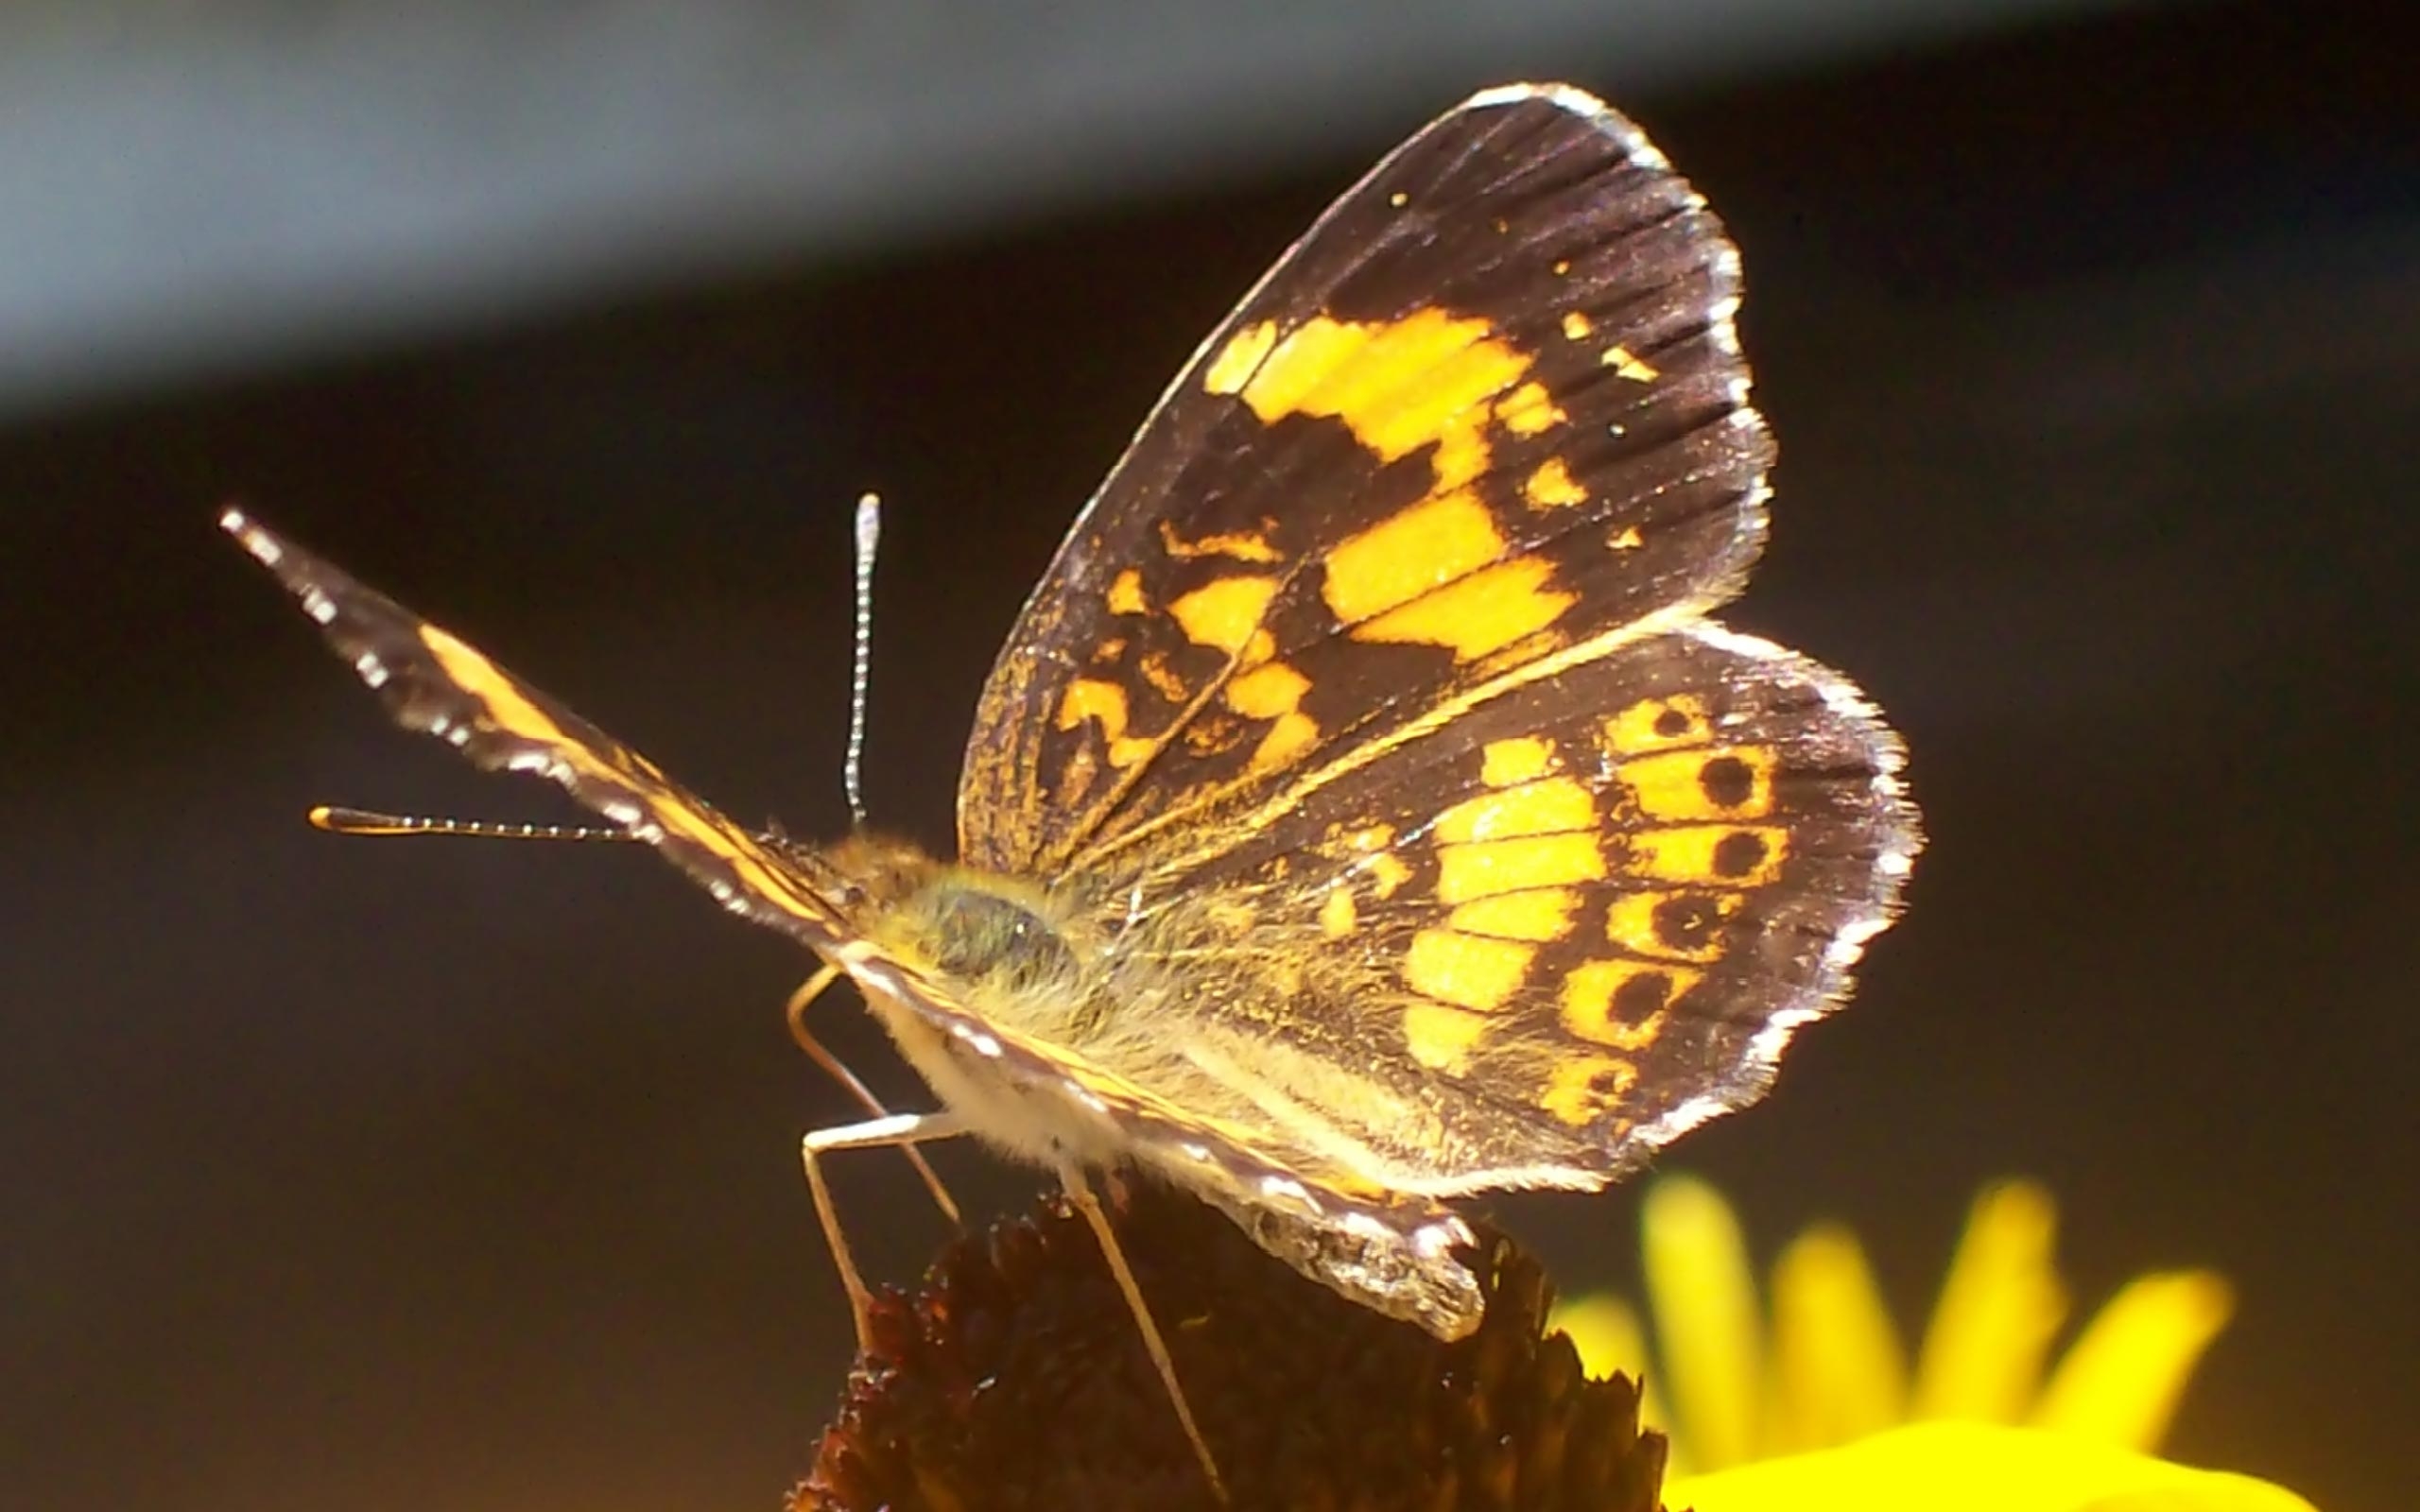 A butterfly with black and yellow wings.